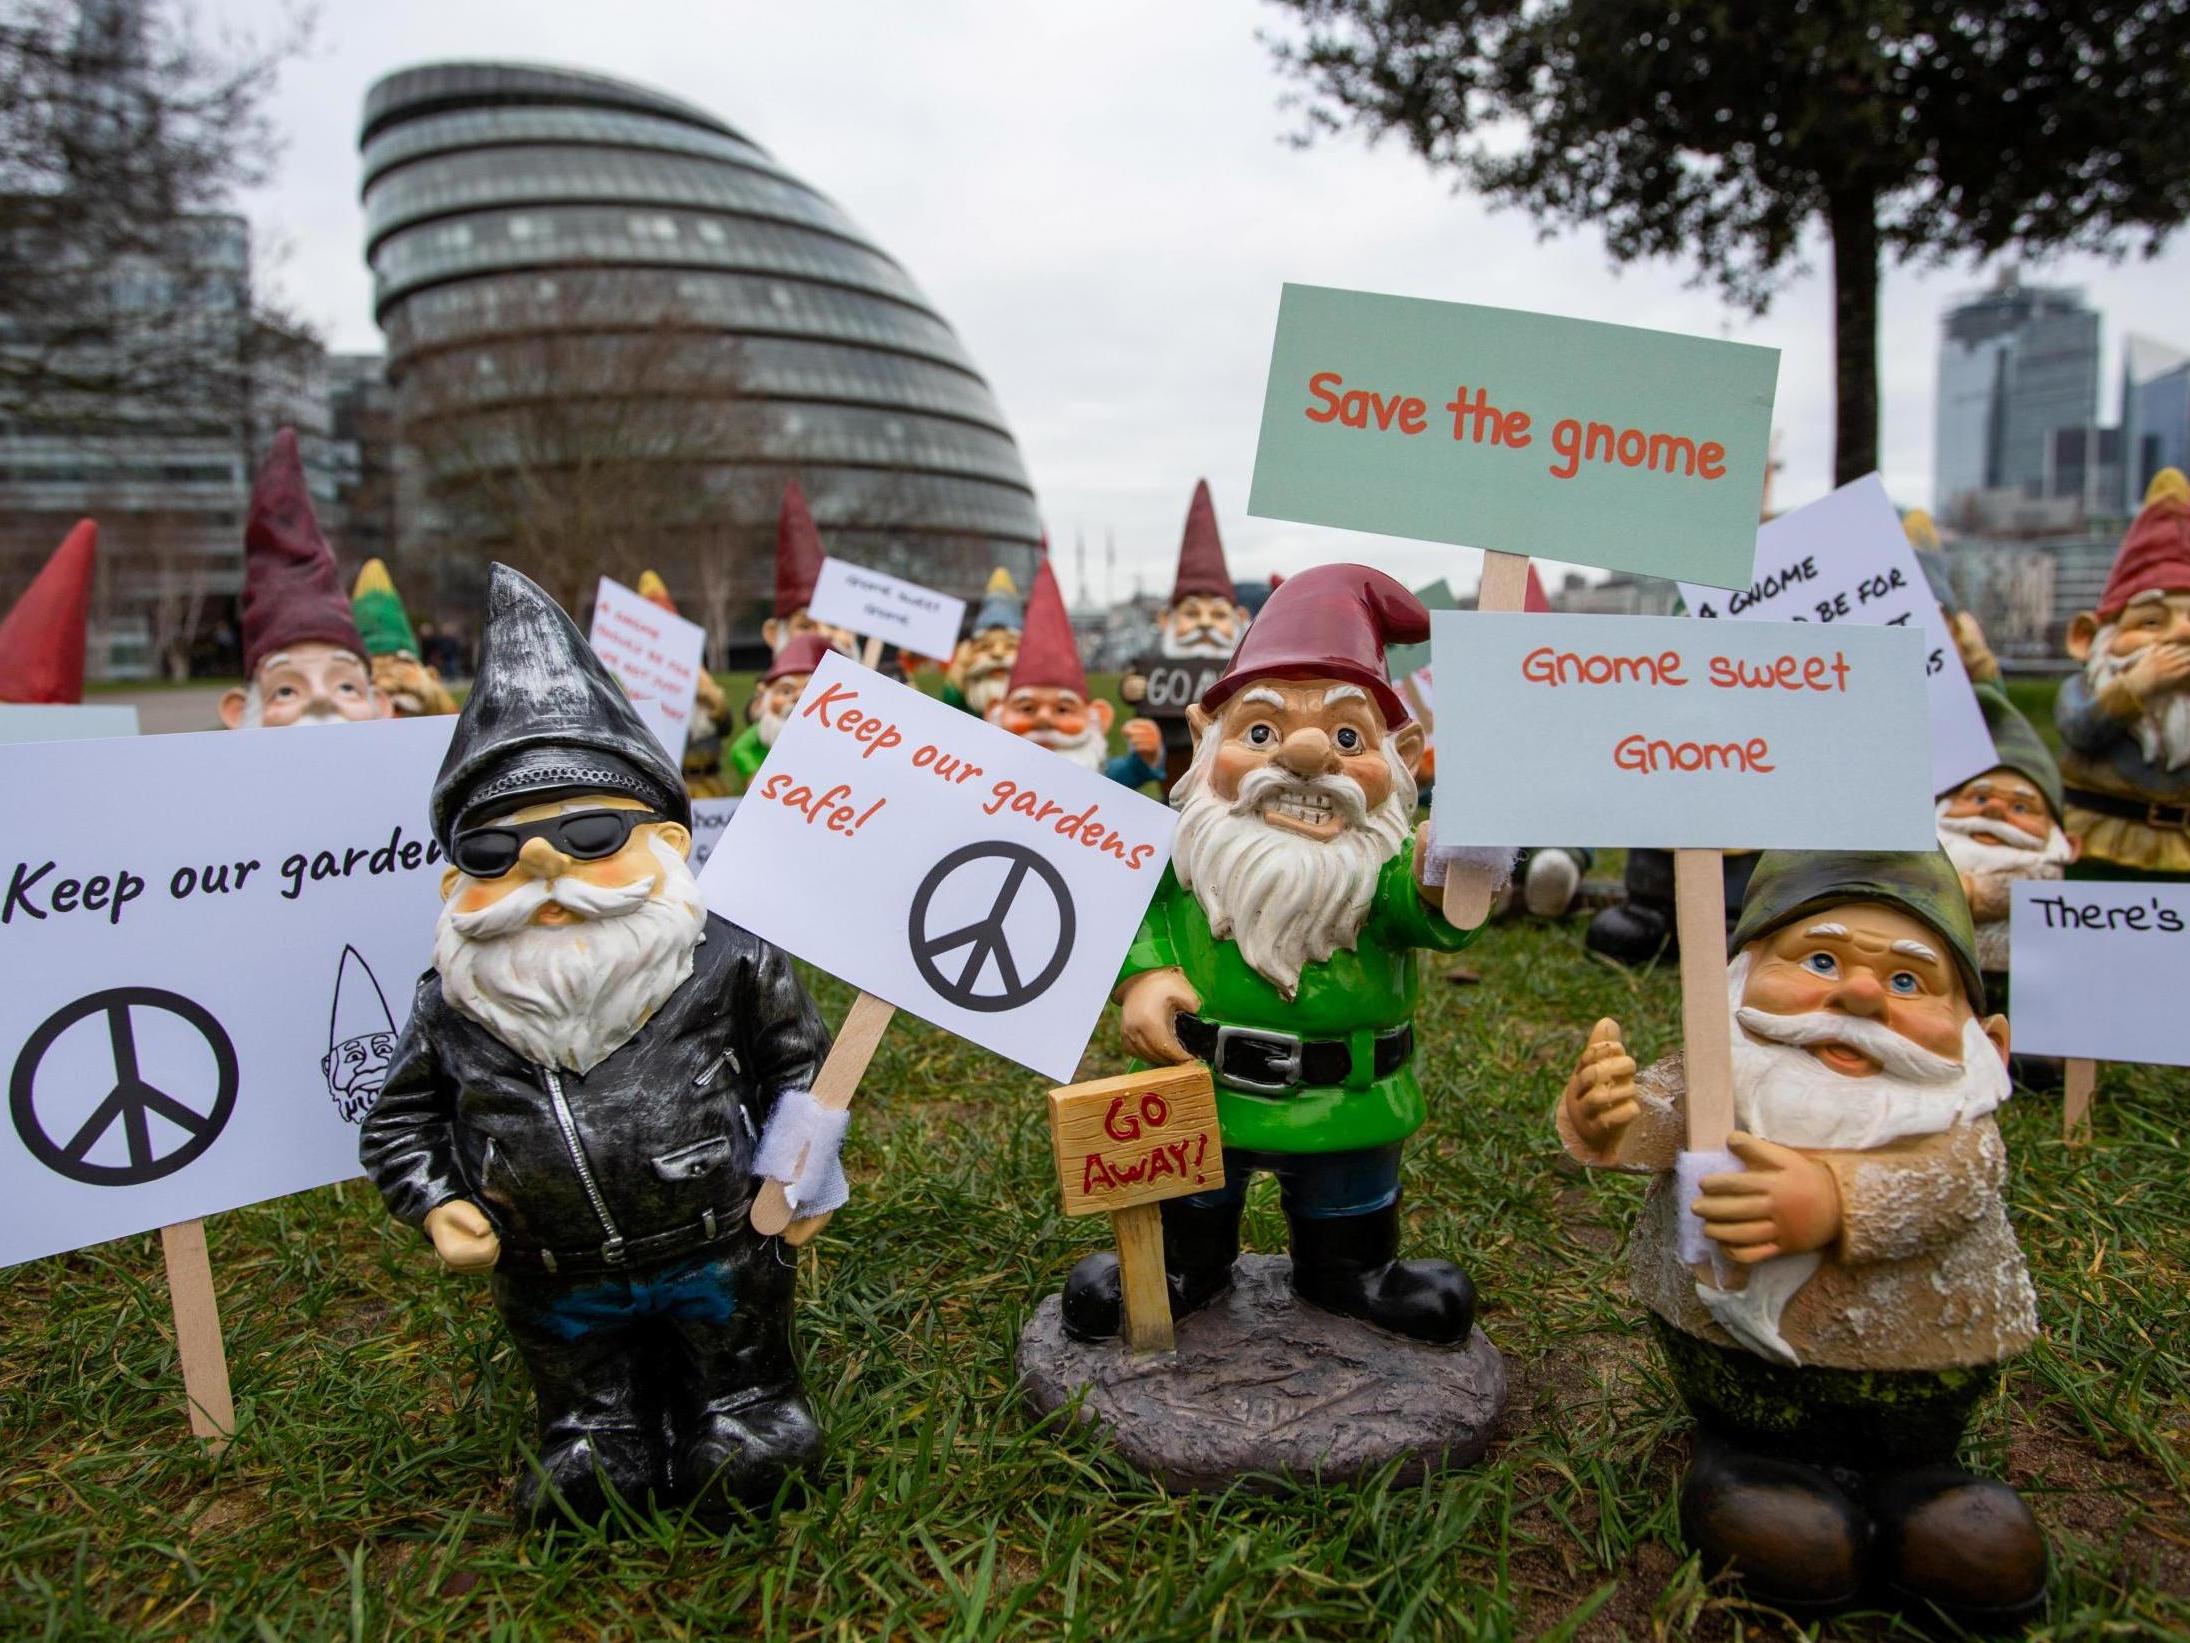 Survey claims gnomes are the most stolen items from gardens homes across the UK